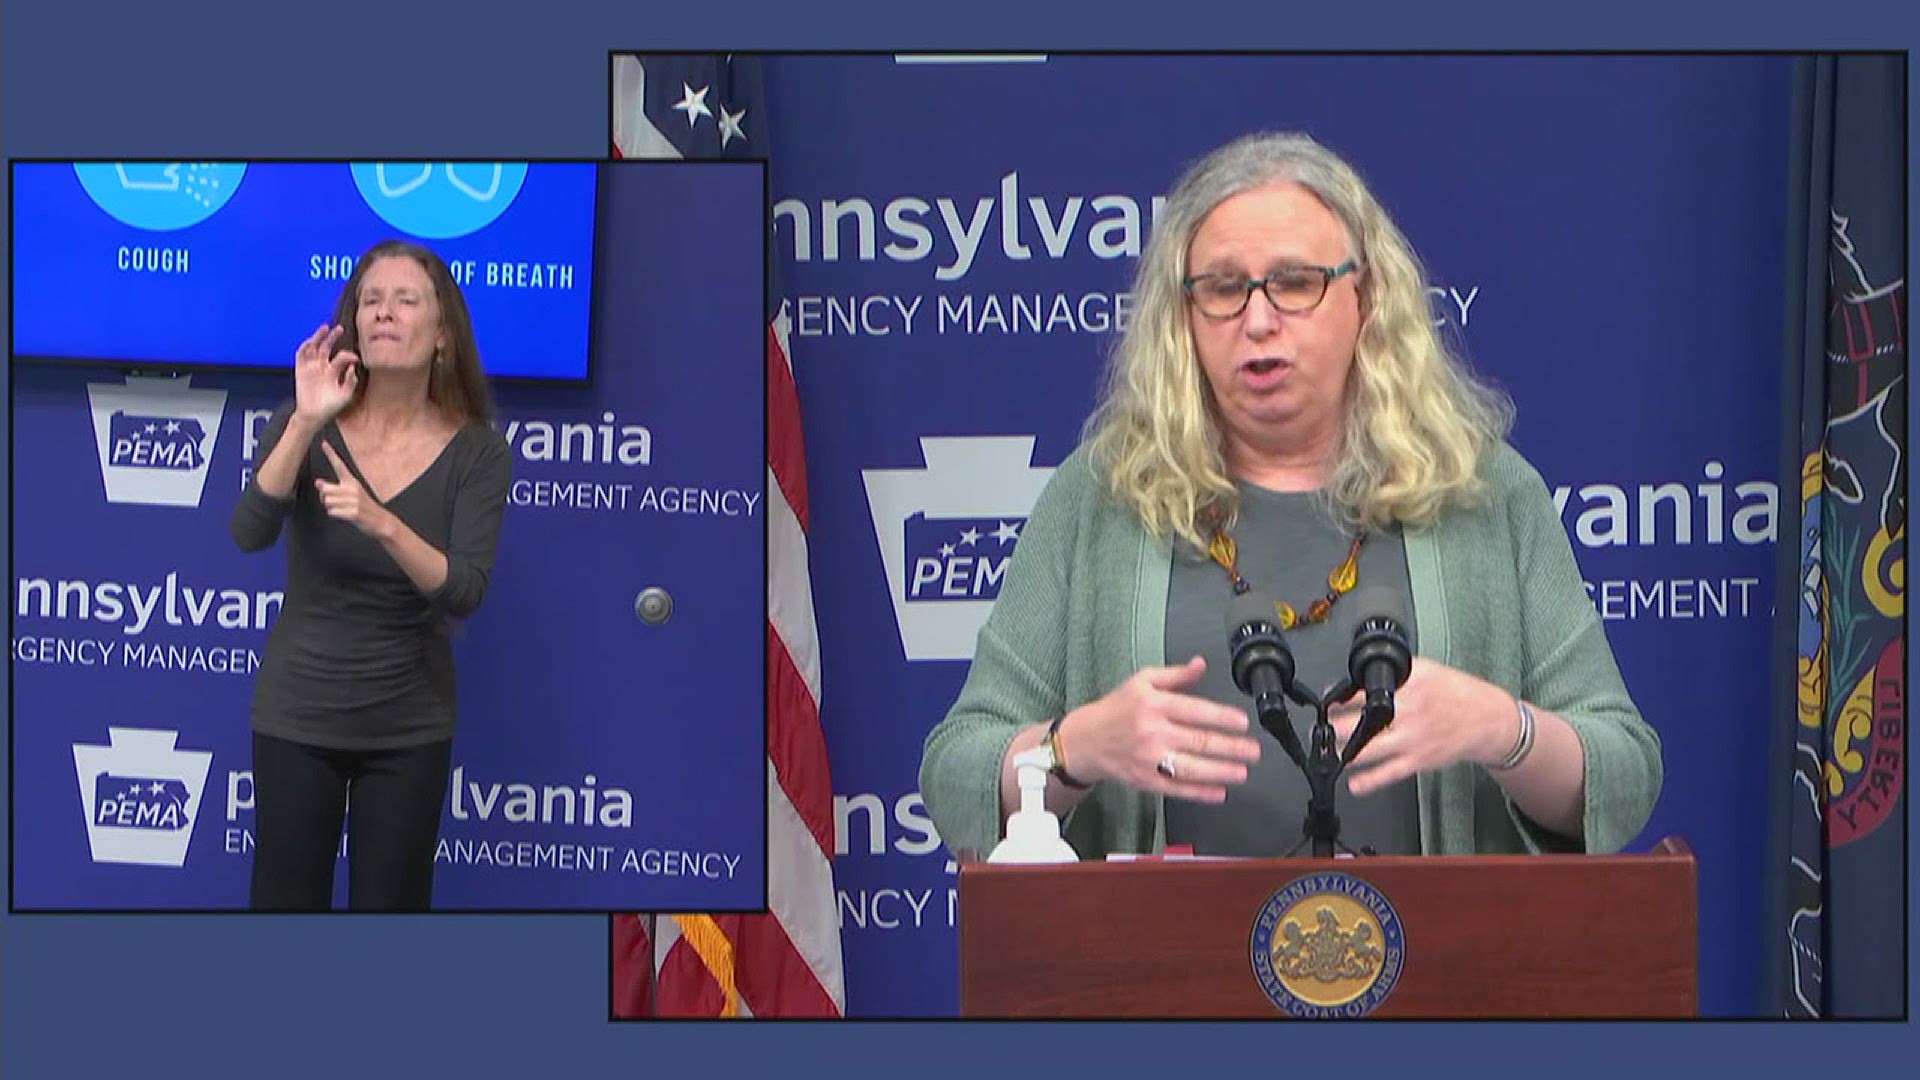 Health Secretary Dr. Rachel Levine says there will be no blanket school closure in PA as COVID-19 cases rise. Recommendations/guidance could change though.